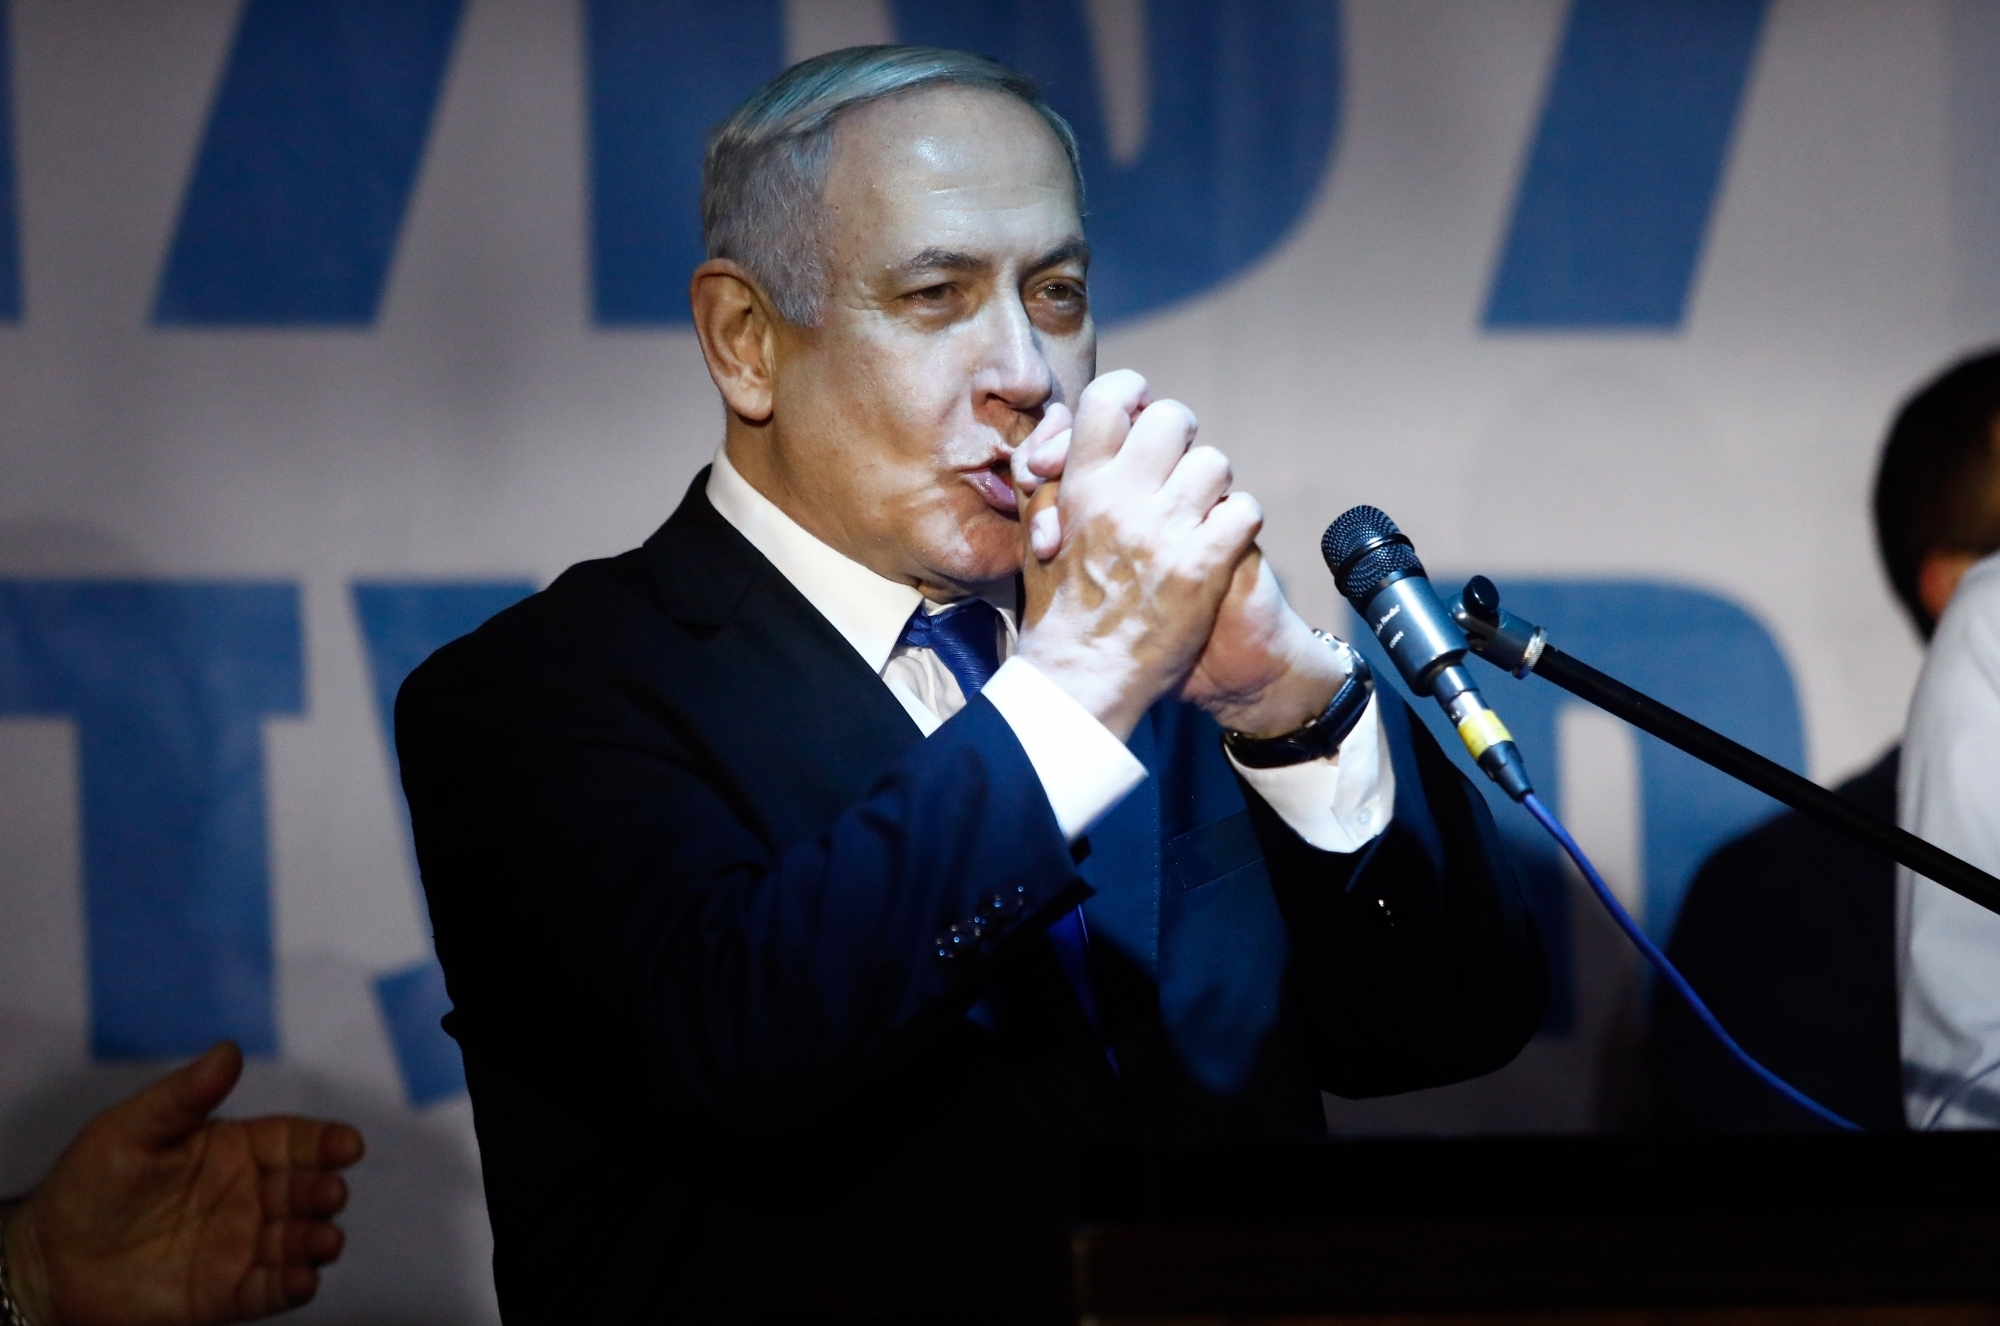 For years, Netanyahu propped up Hamas as counter to Palestinian